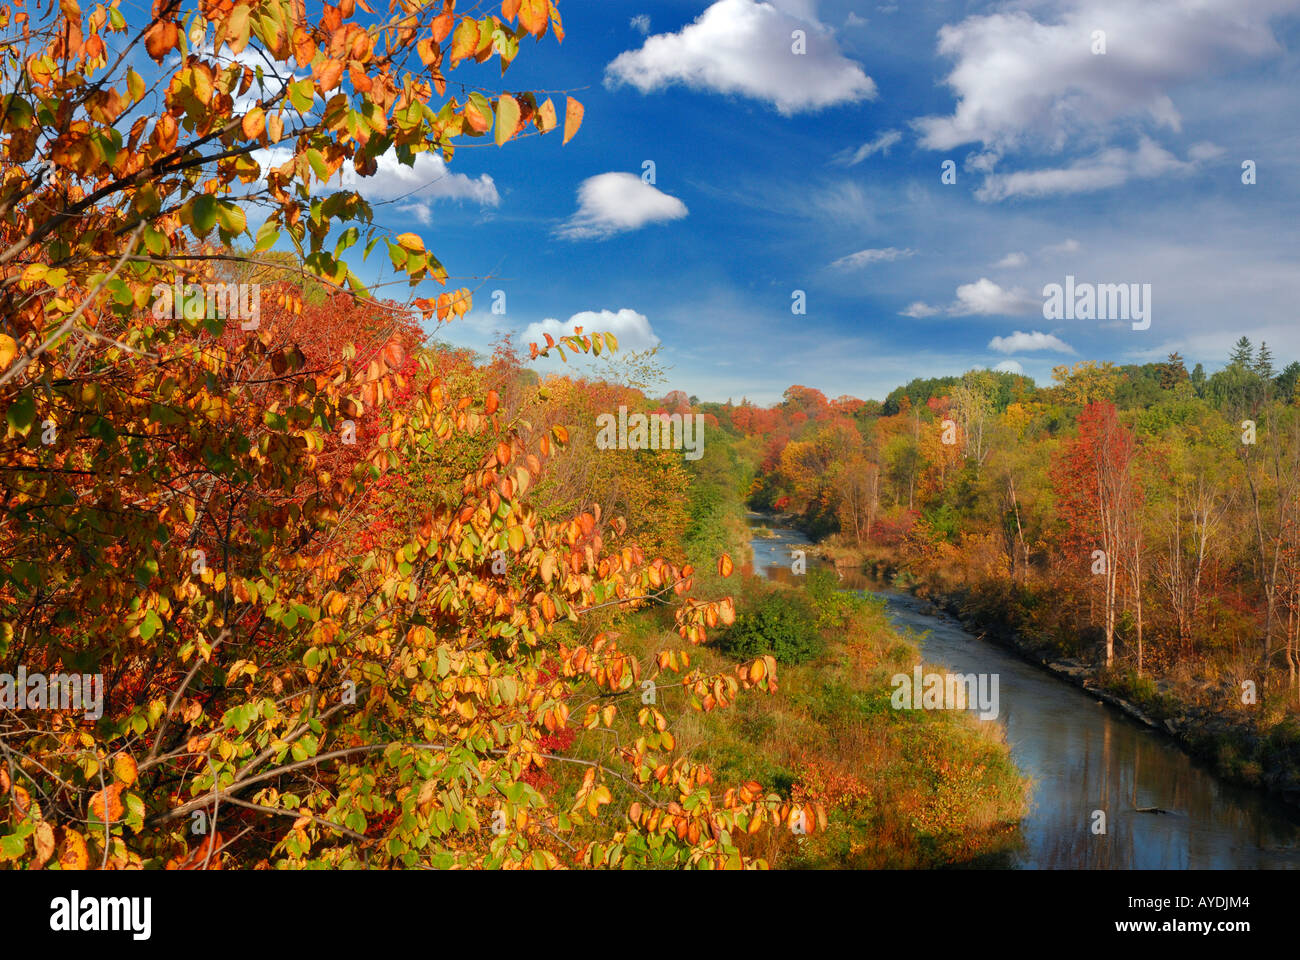 Fall colors changing leaf color along the Humber river Islington Avenue Toronto Stock Photo